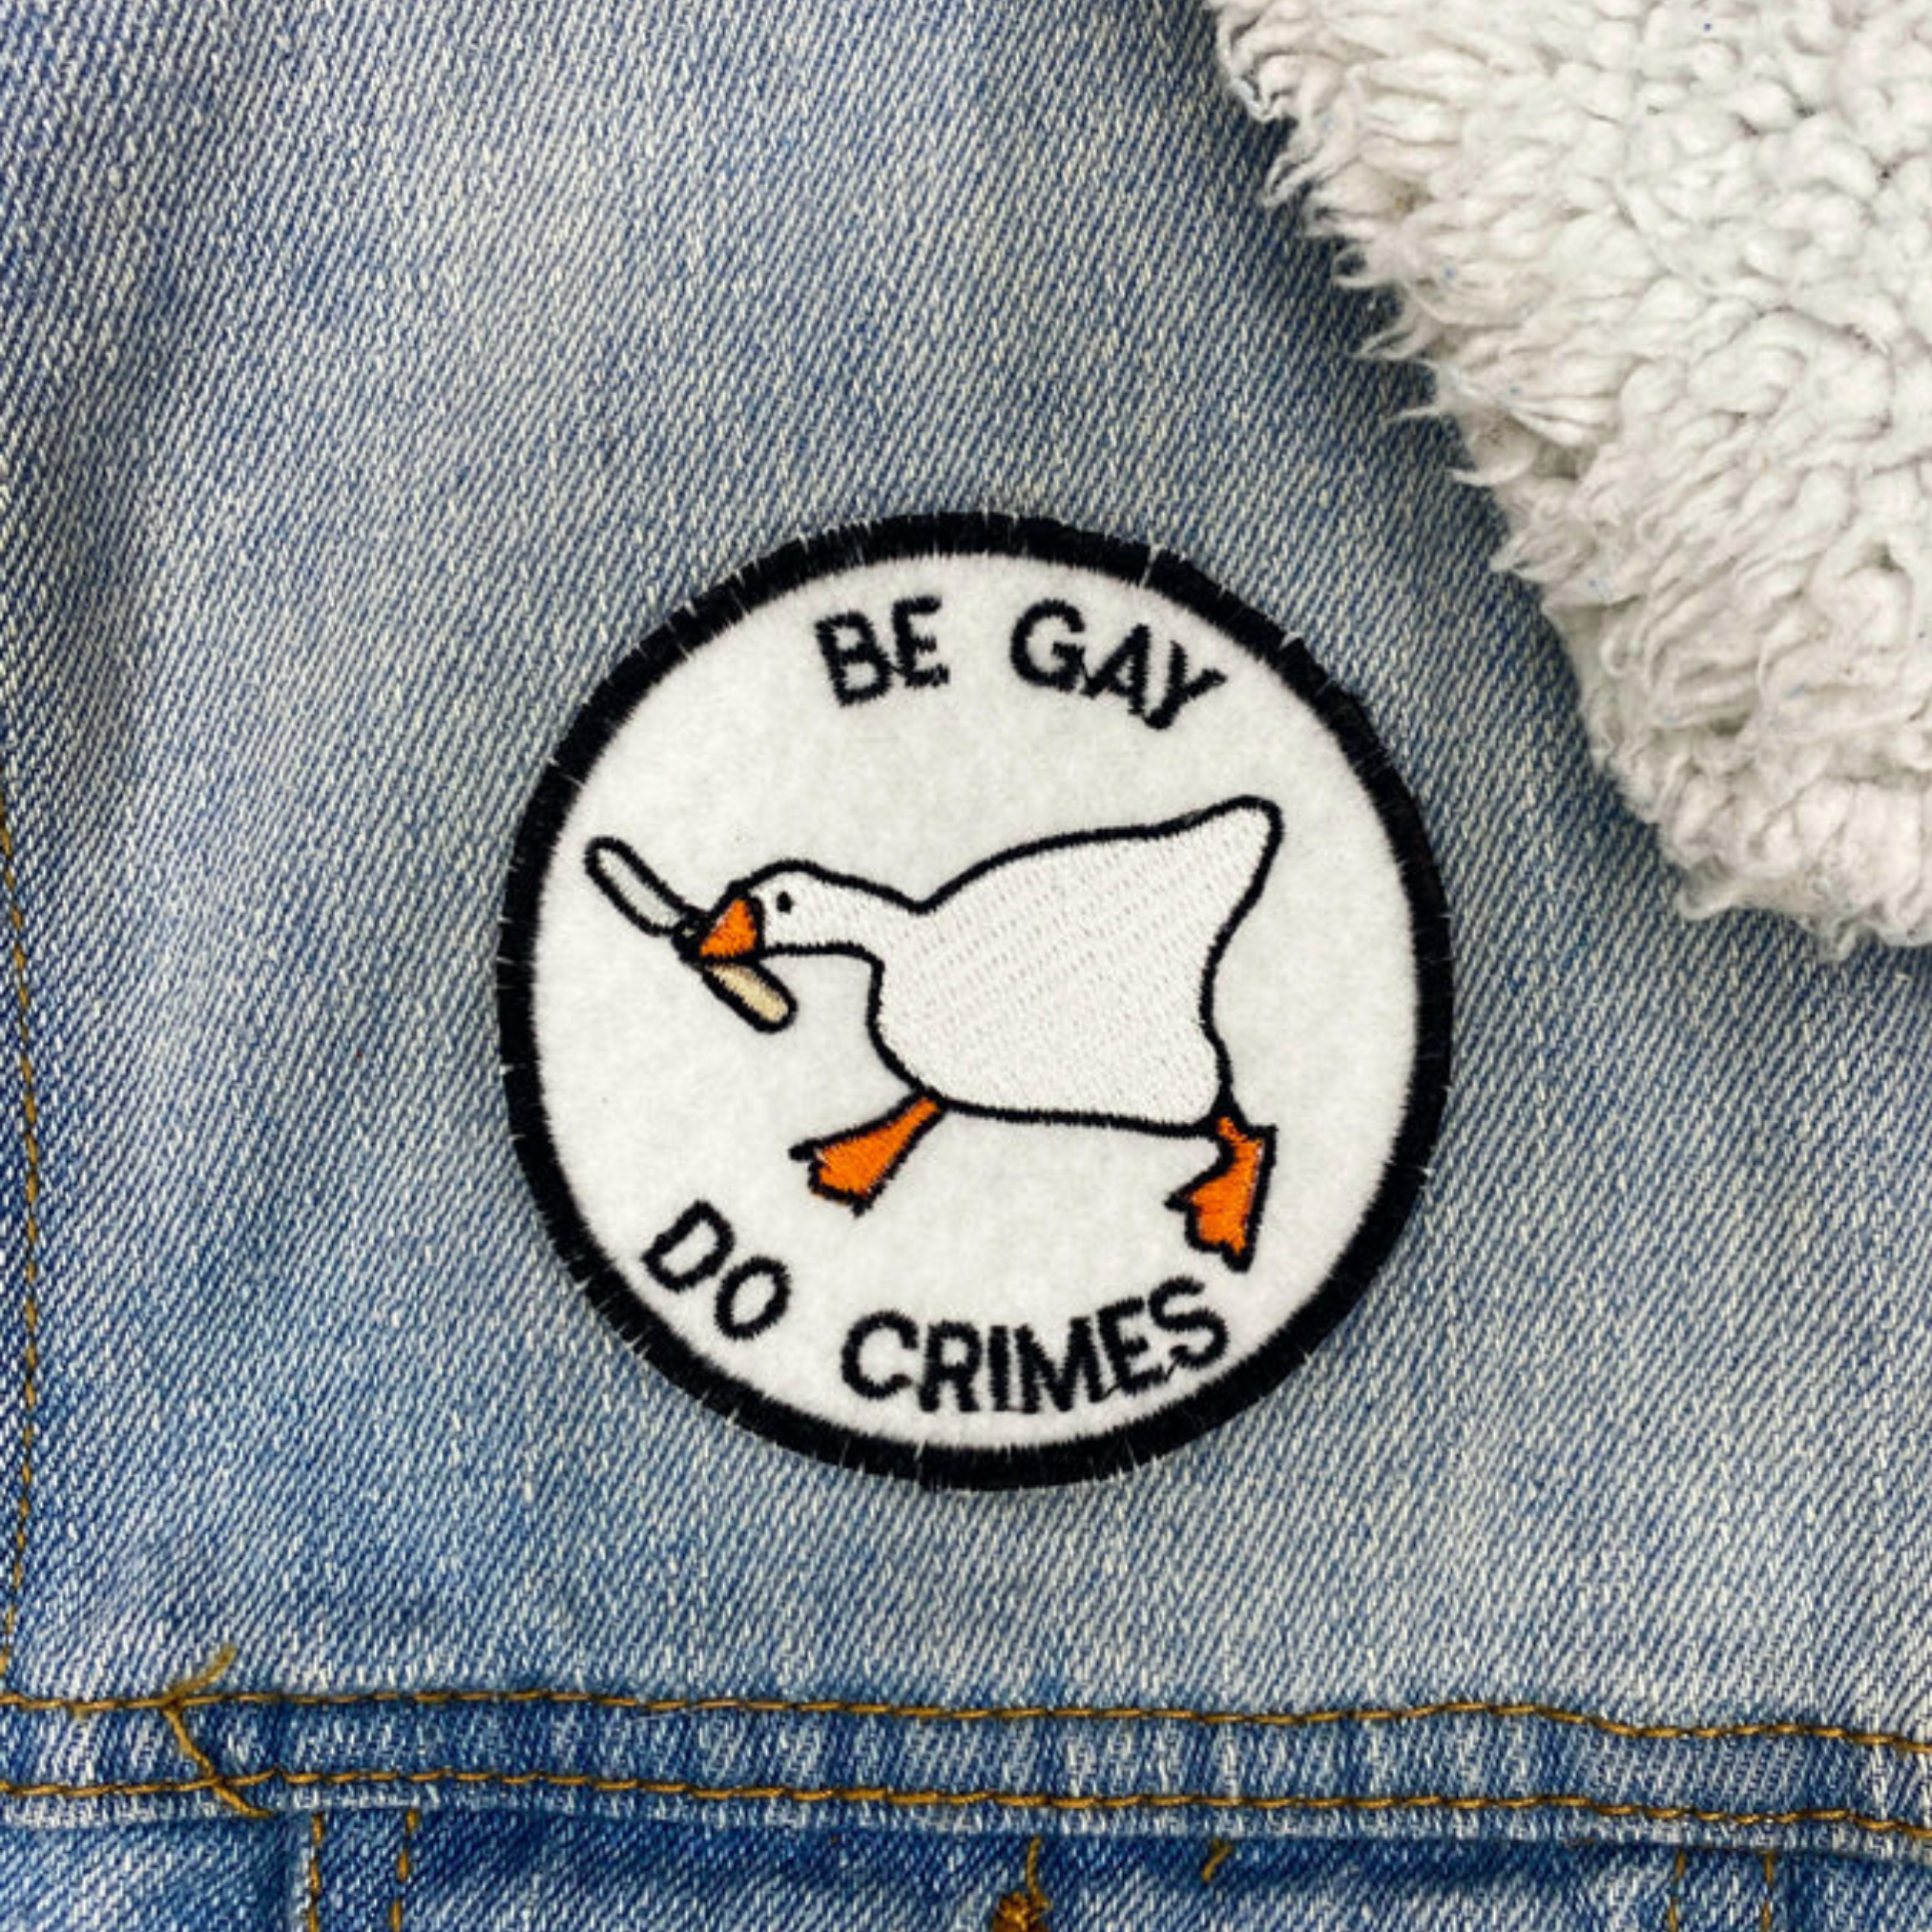 Untitled Goose Game "No Gods No Masters" Embroidered Iron-on Patch